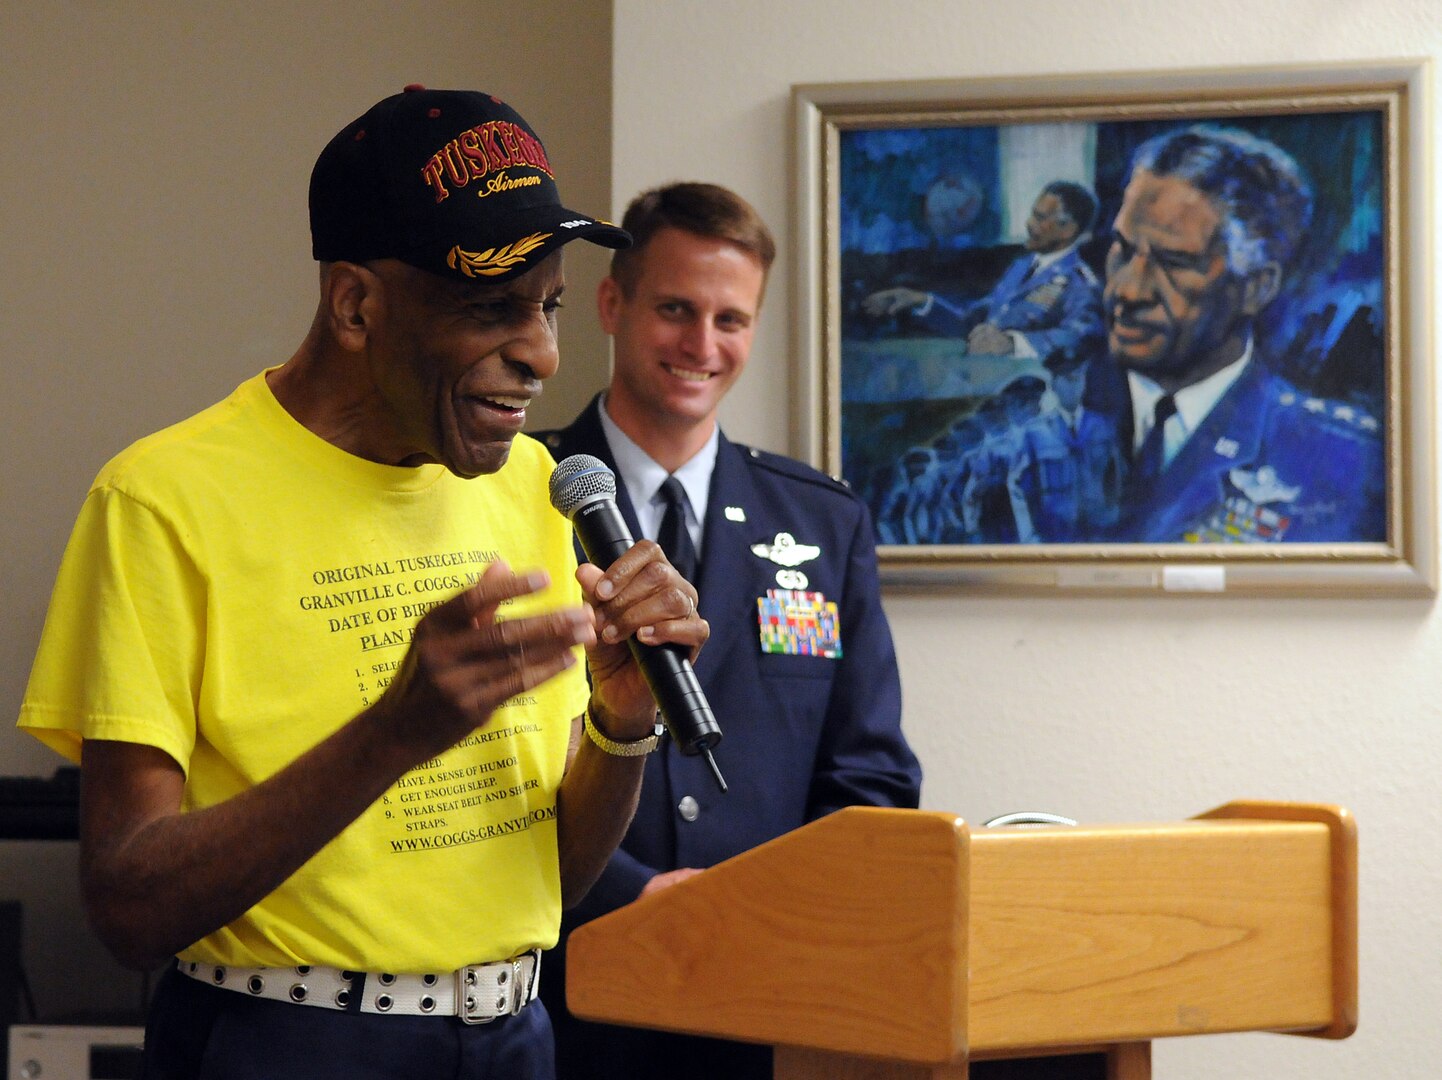 Dr. Granville Coggs, a Tuskegee Airman pilot, aerialgunner and bombardier; doctor; and lieutenant colonel; speaks at the First Tuskegee Heritage Breakfast Feb. 9 at the 99th Flying Training Squadron. Activated on March 22, 1941, the 99th FTS was originally designated as the 99th Pursuit Squadron, and was better known as the "Tuskegee Airmen," the first all-black unit in the U.S. Army Air Corps. (U.S. Air Force photo by Rich McFadden)